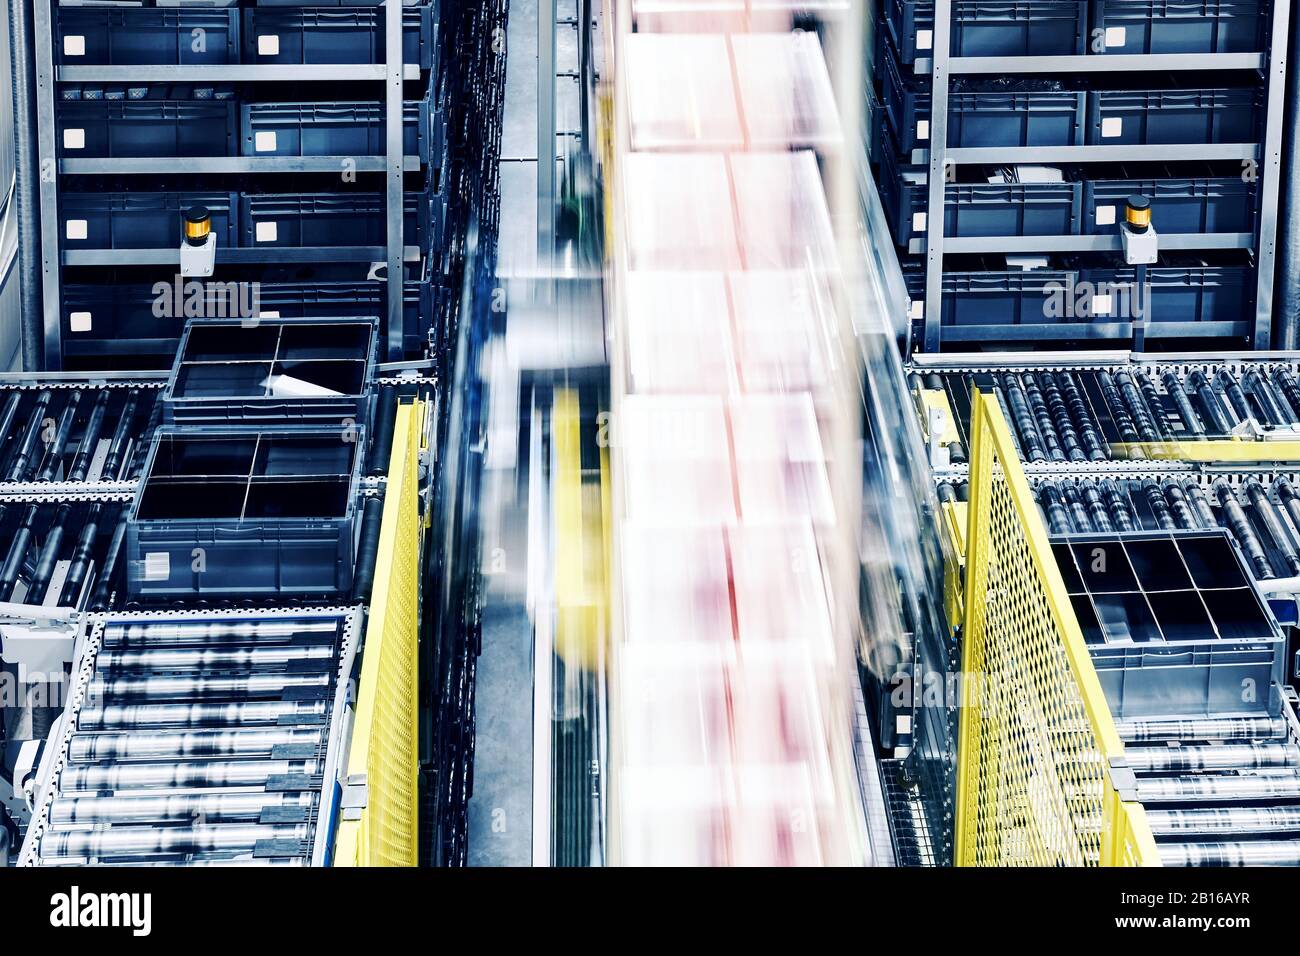 Moving lift in an automated warehouse. Stock Photo